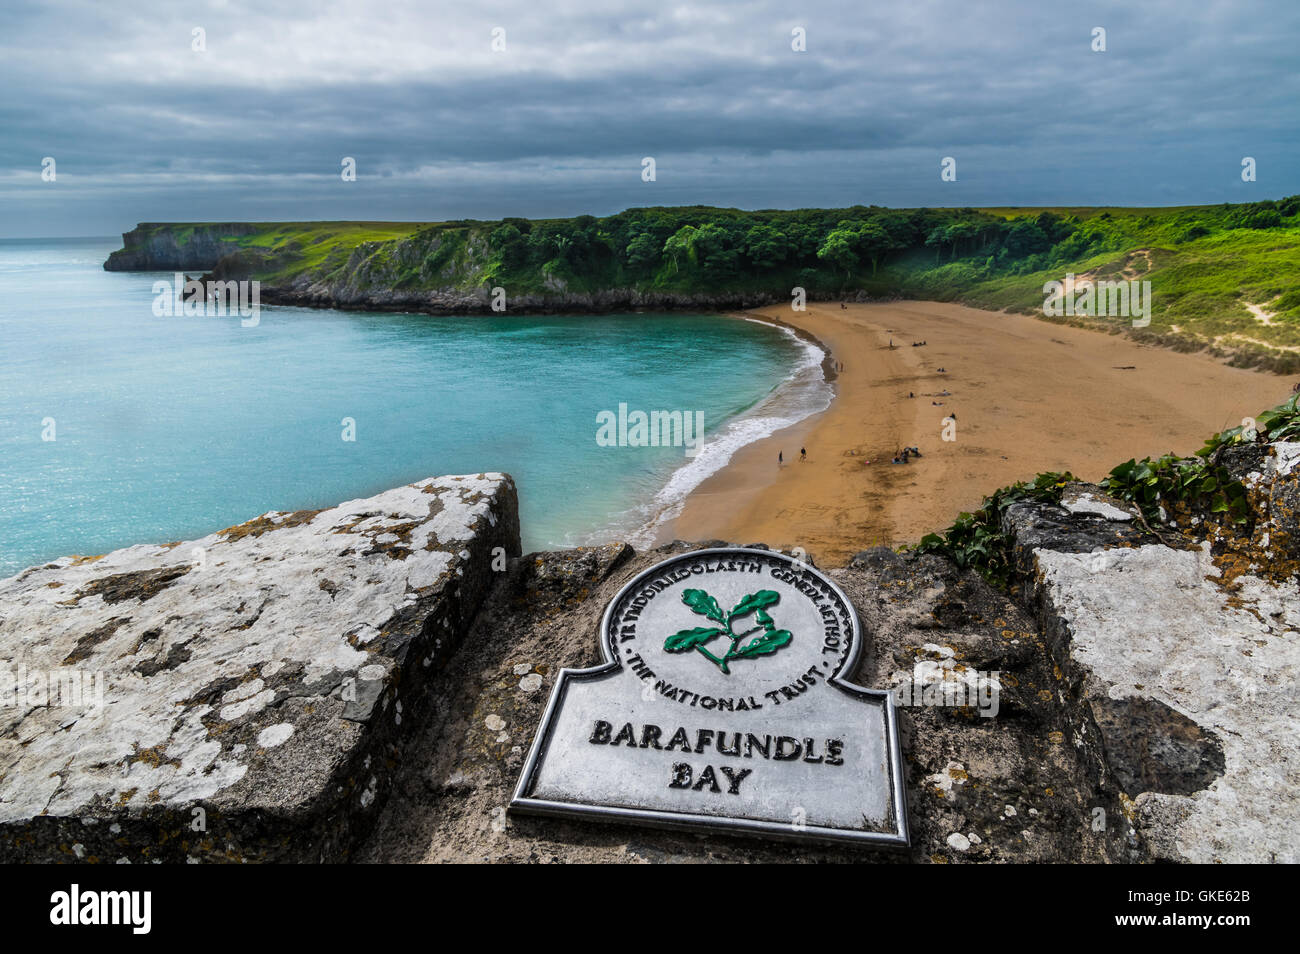 A stunning panoramic image of the Barafundle Bay in Pembrokshire showing the crystal clear water and stunning shoreline. Stock Photo